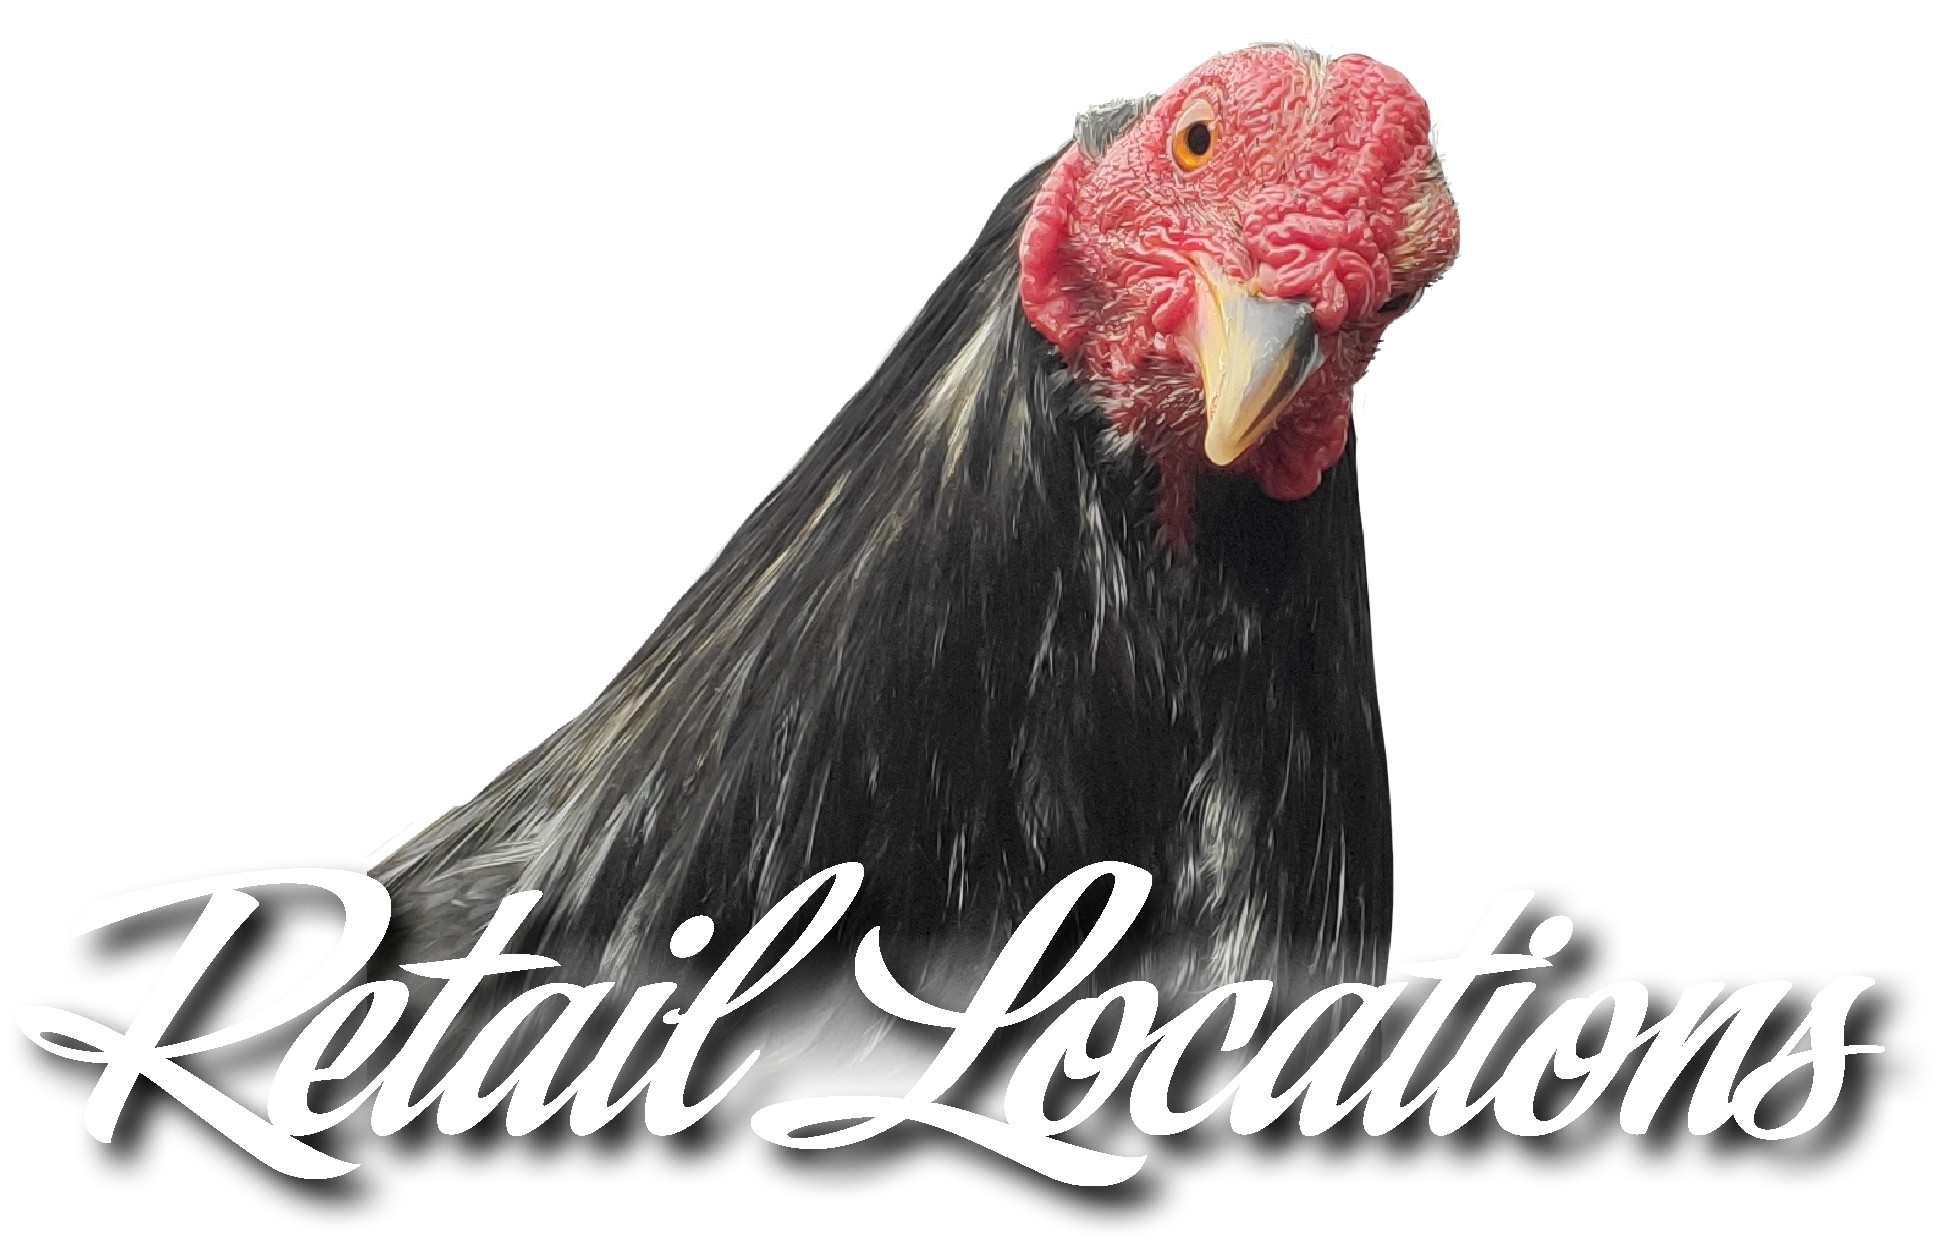 Inquisitive rooster looking over retail locations text